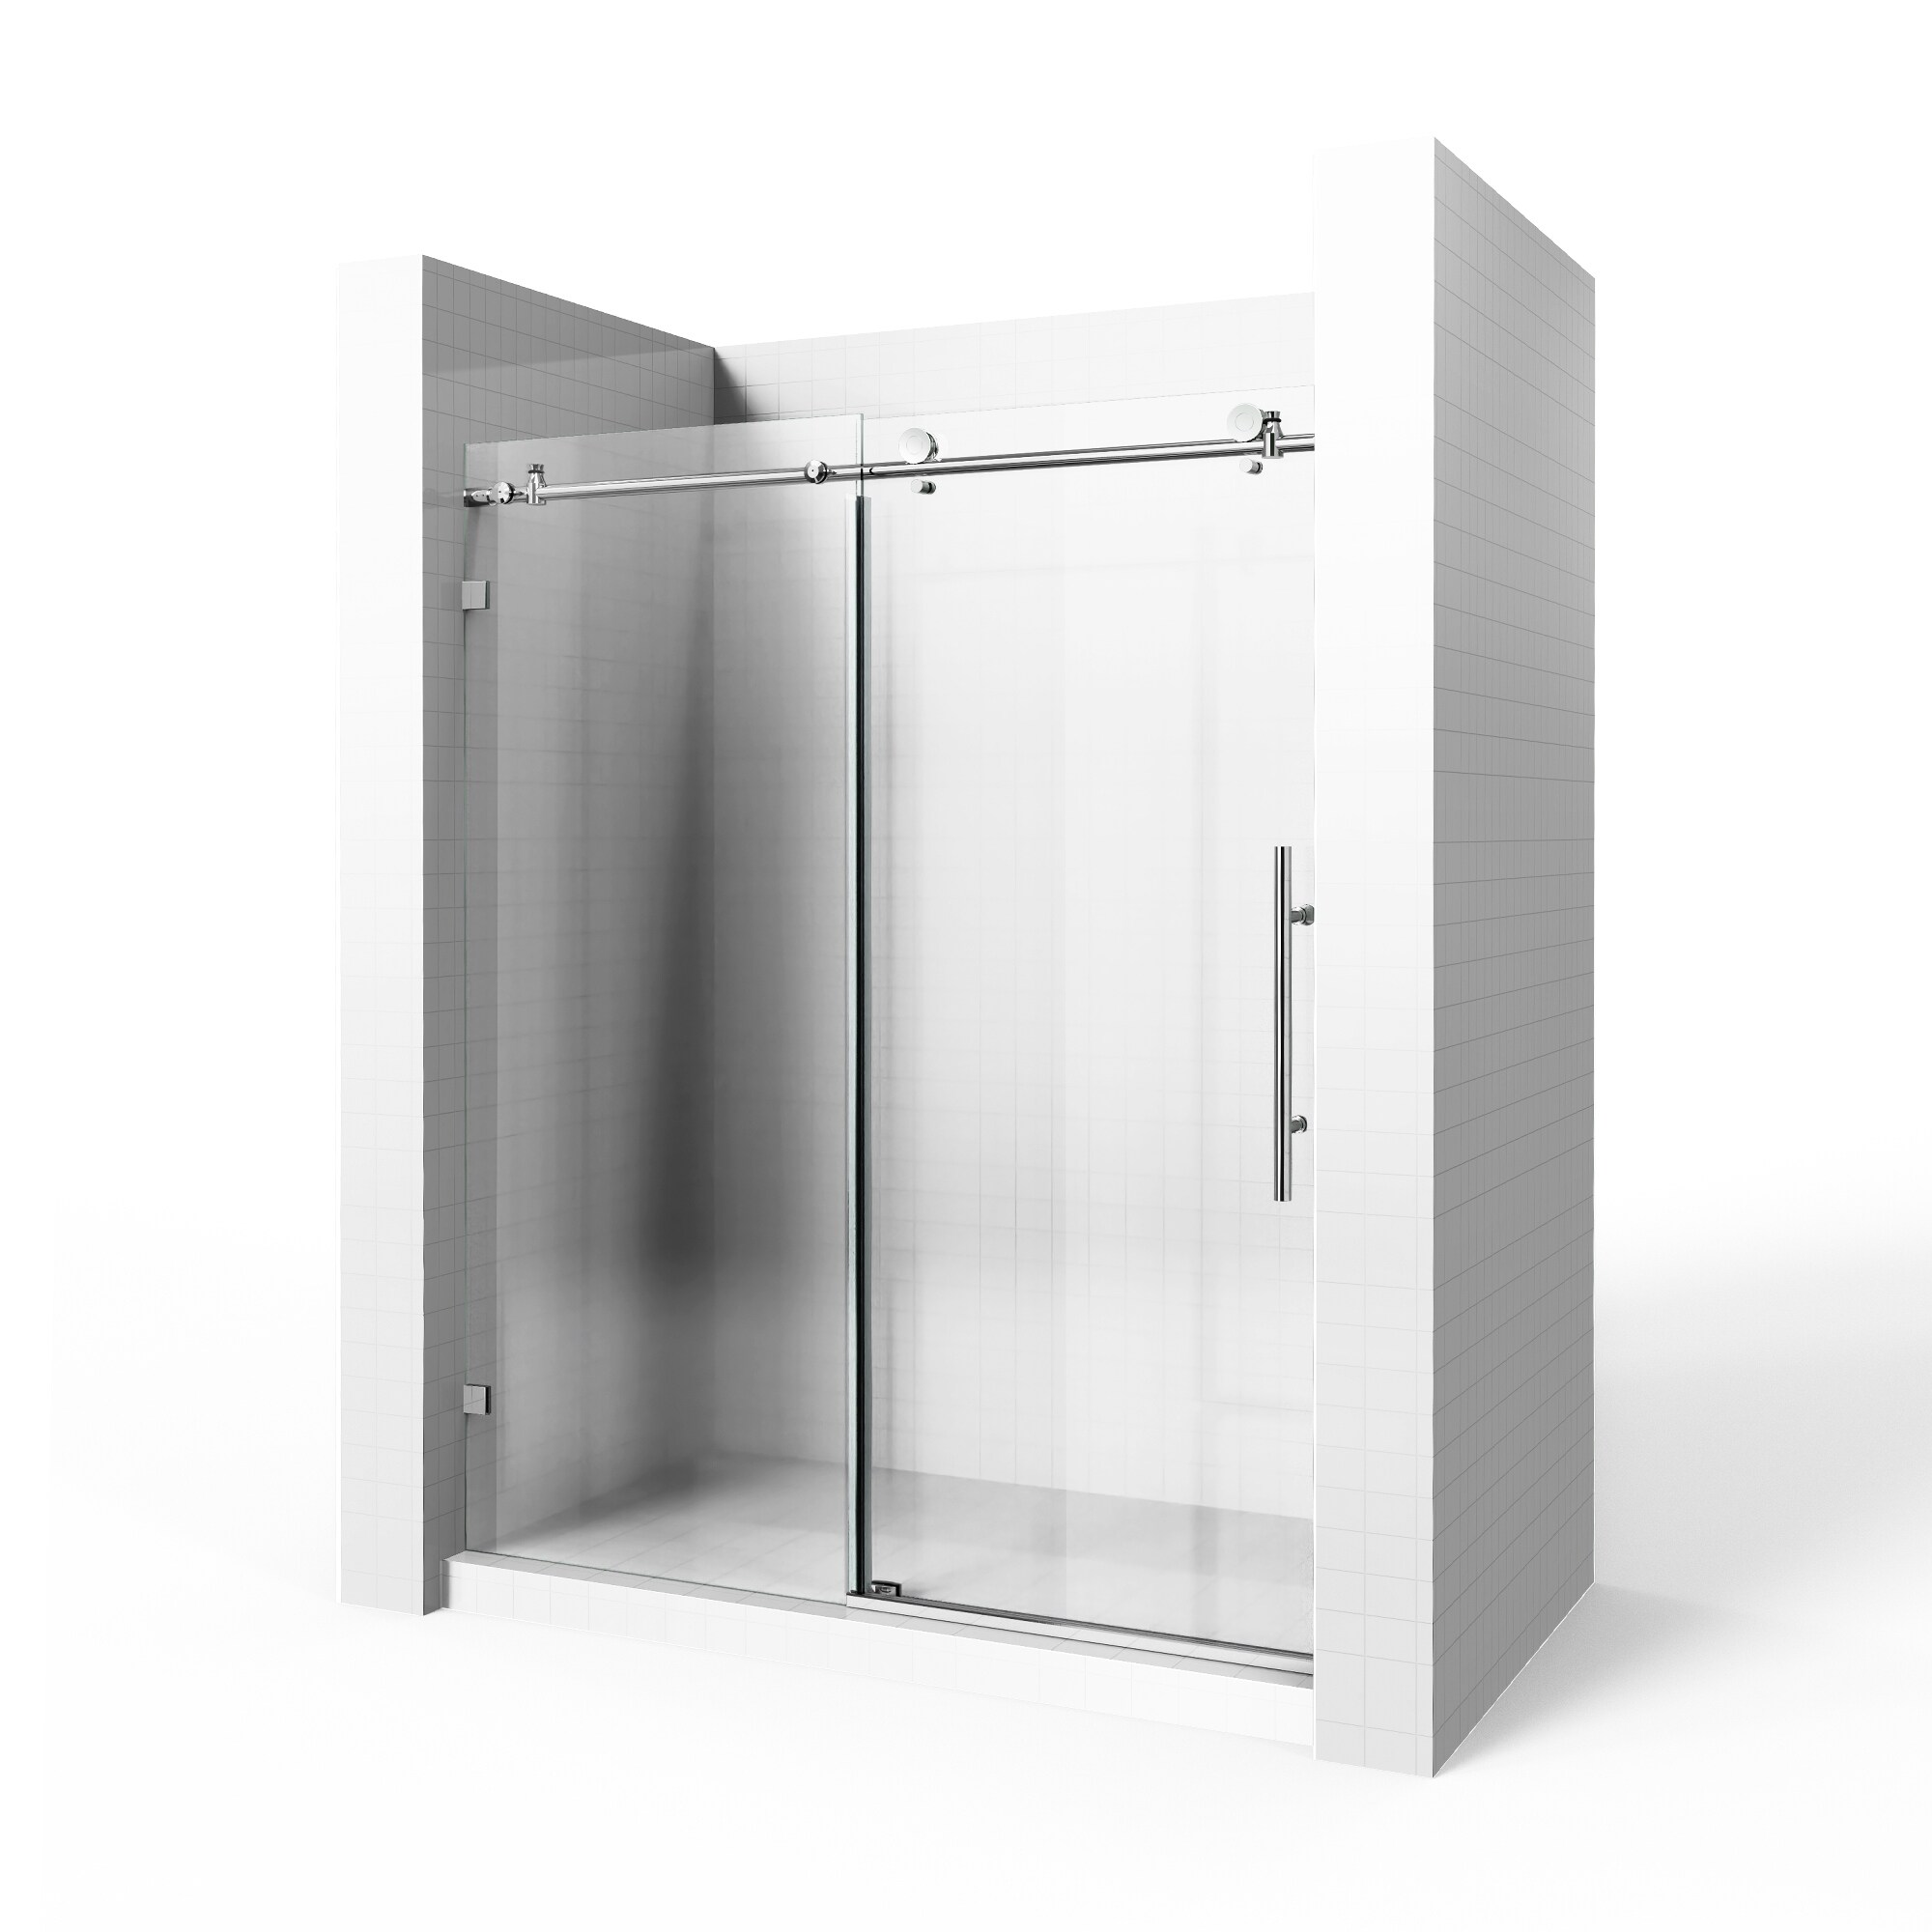 Frameless Sliding Shower Door with 3/8 in. Clear Glass 60 in. W x 76 in. H Chrome Finish - 60" W x 76" H